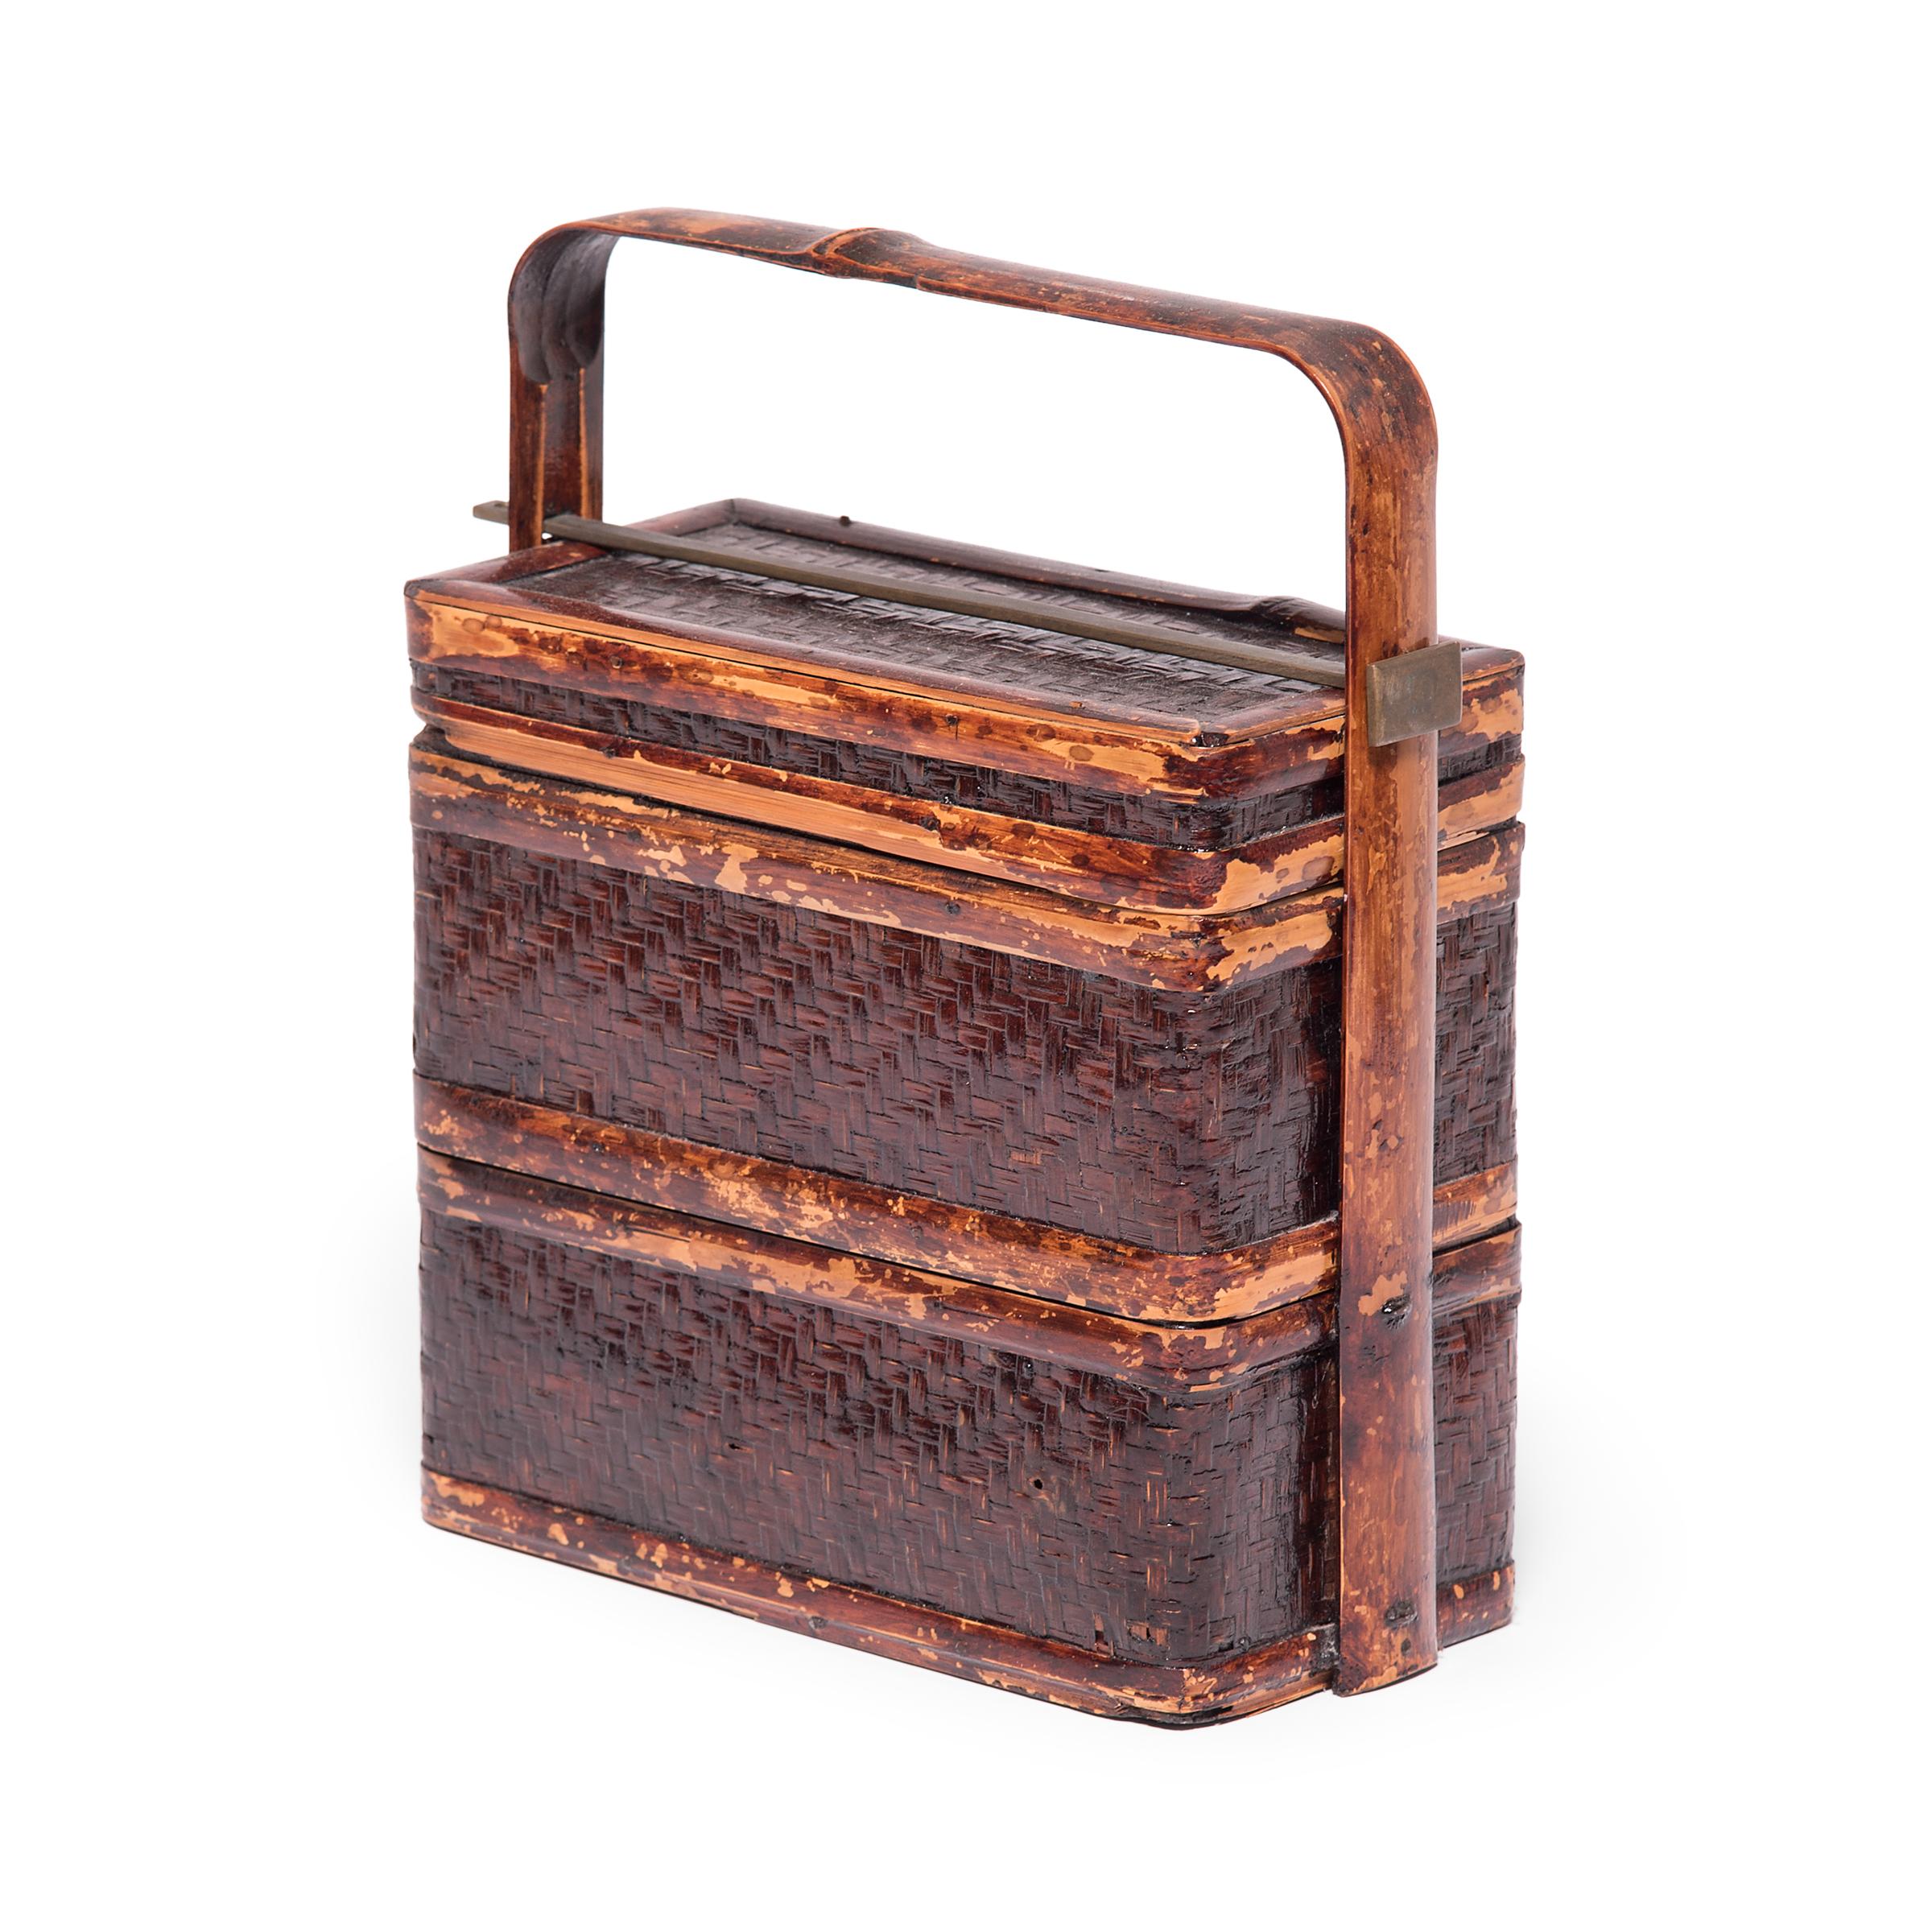 The basic form of this three-tiered box with handle has remained unchanged for a thousand years. Used like the modern lunchbox, each tier of this portable stacking box would have been filled with food and carried around by the handle. Unlike